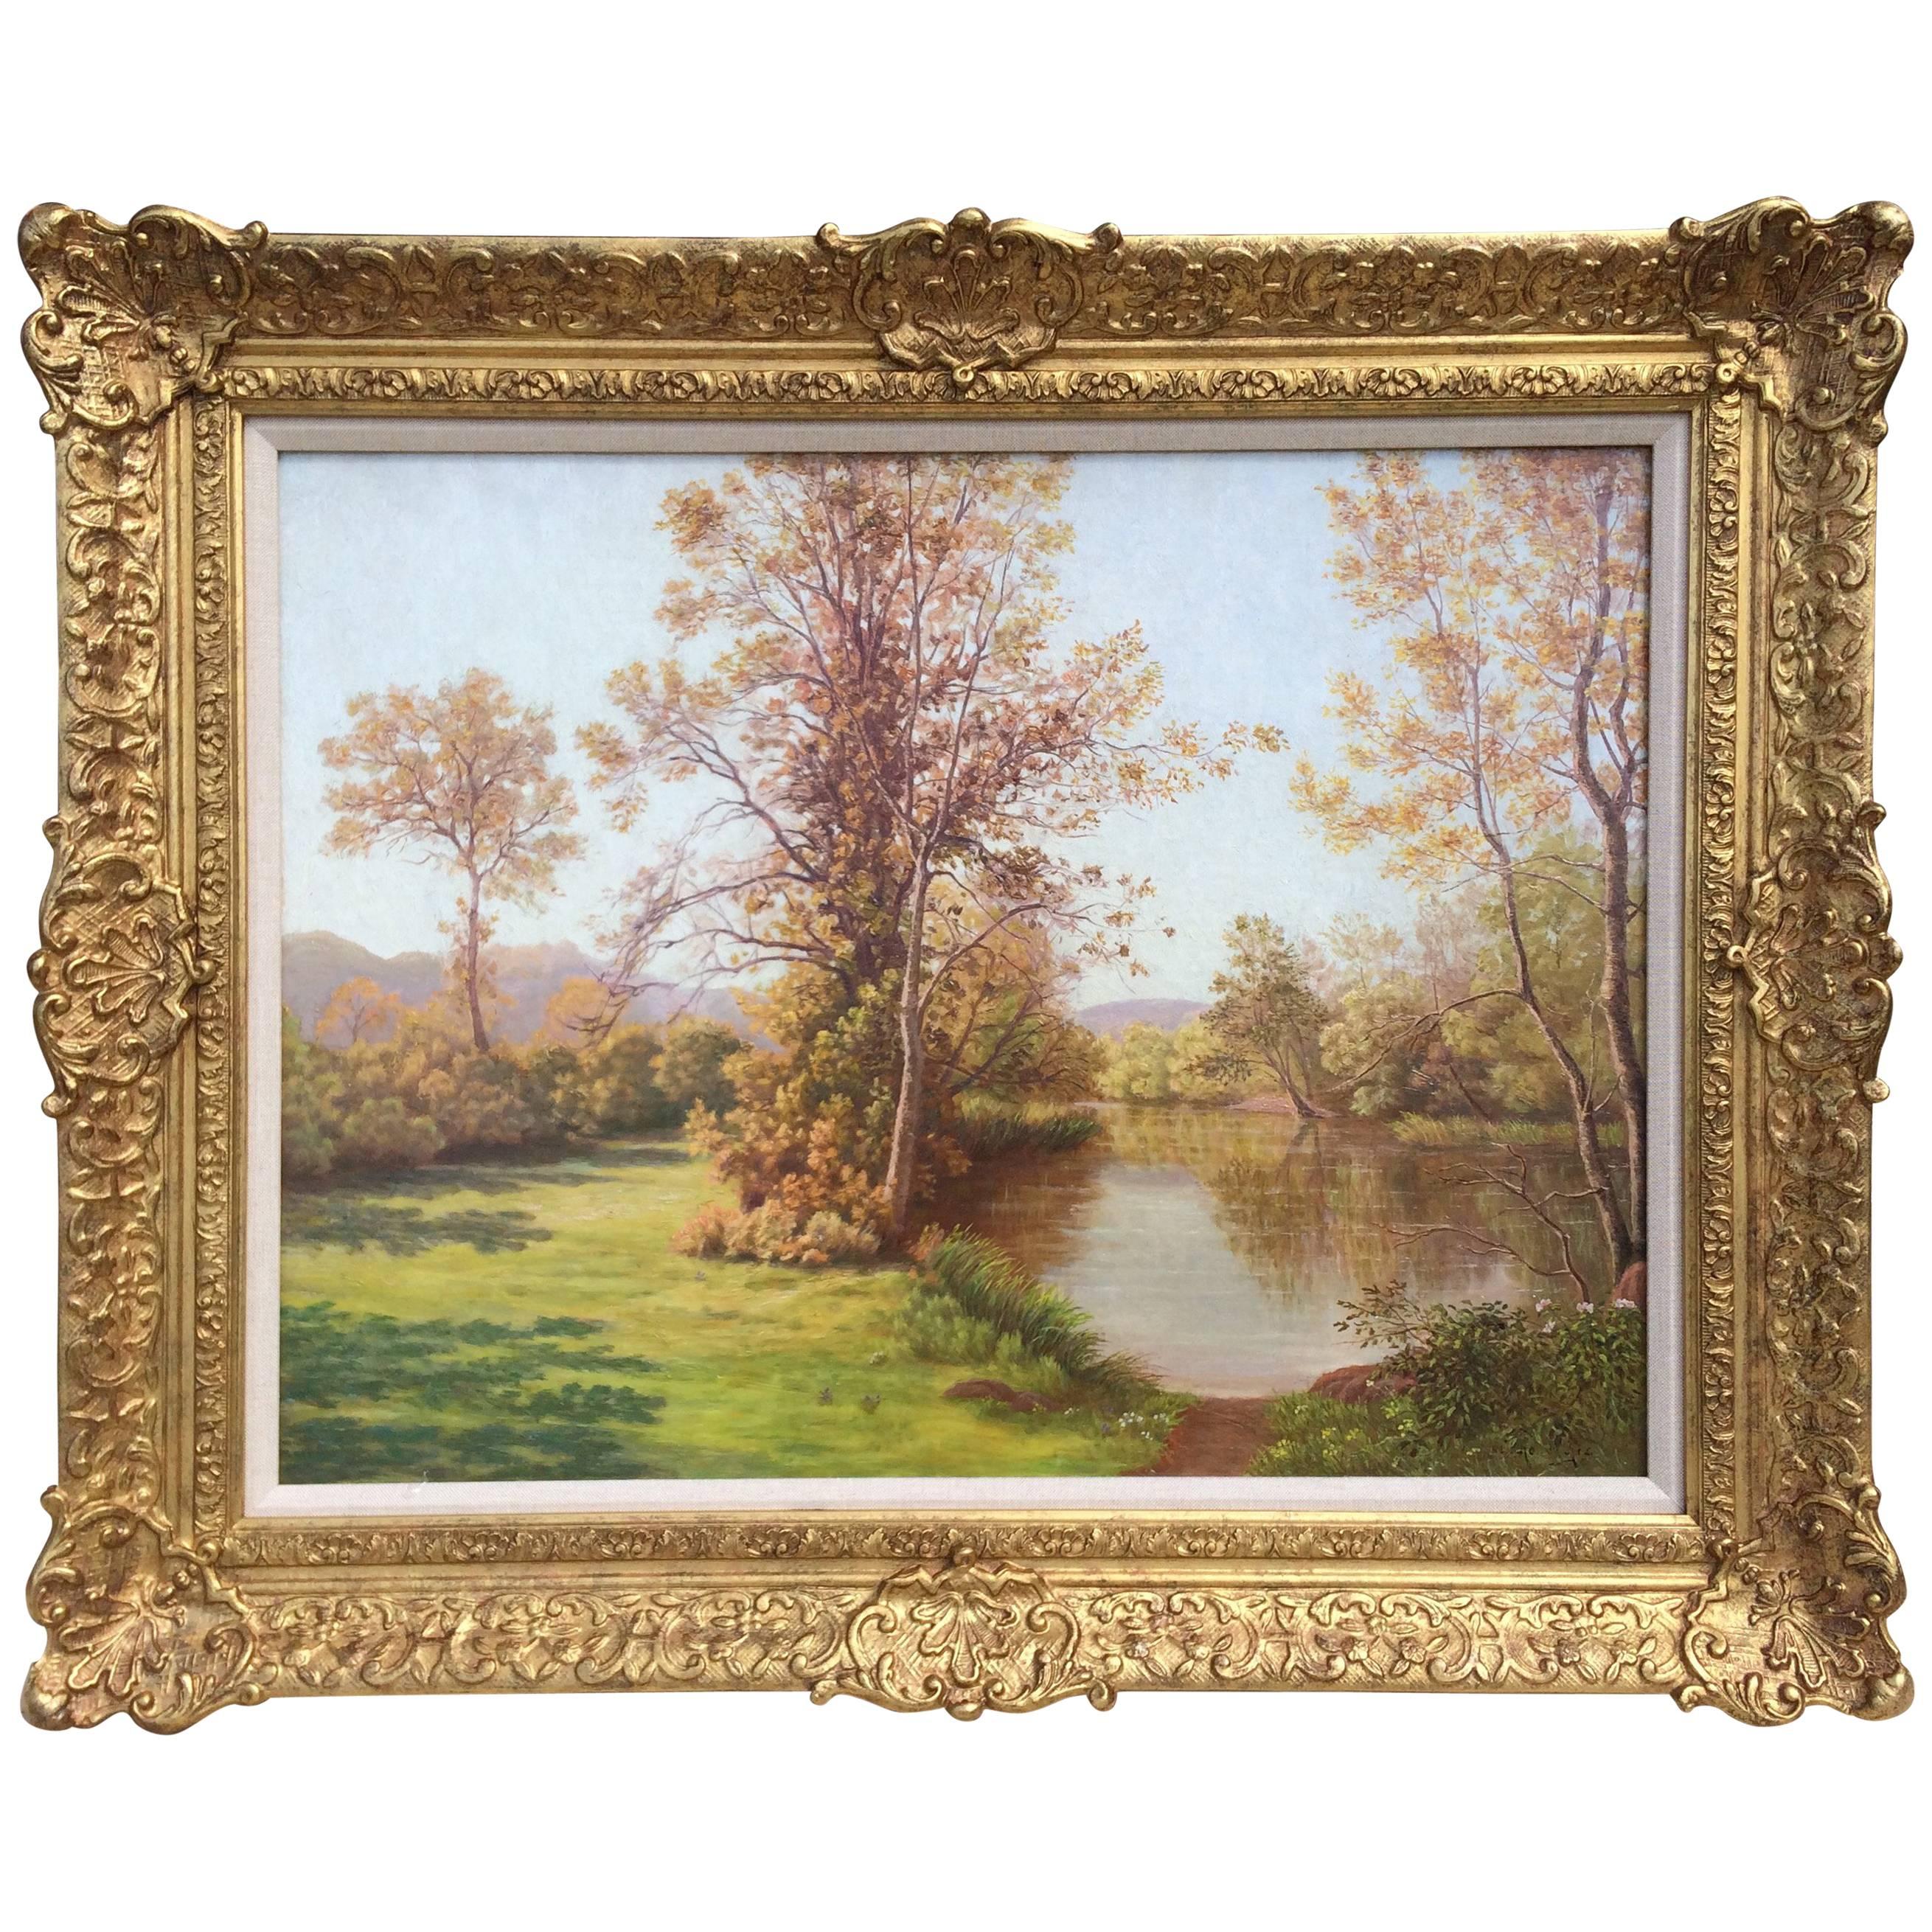 "The Tranquil River" by Charles Edmond Rene His